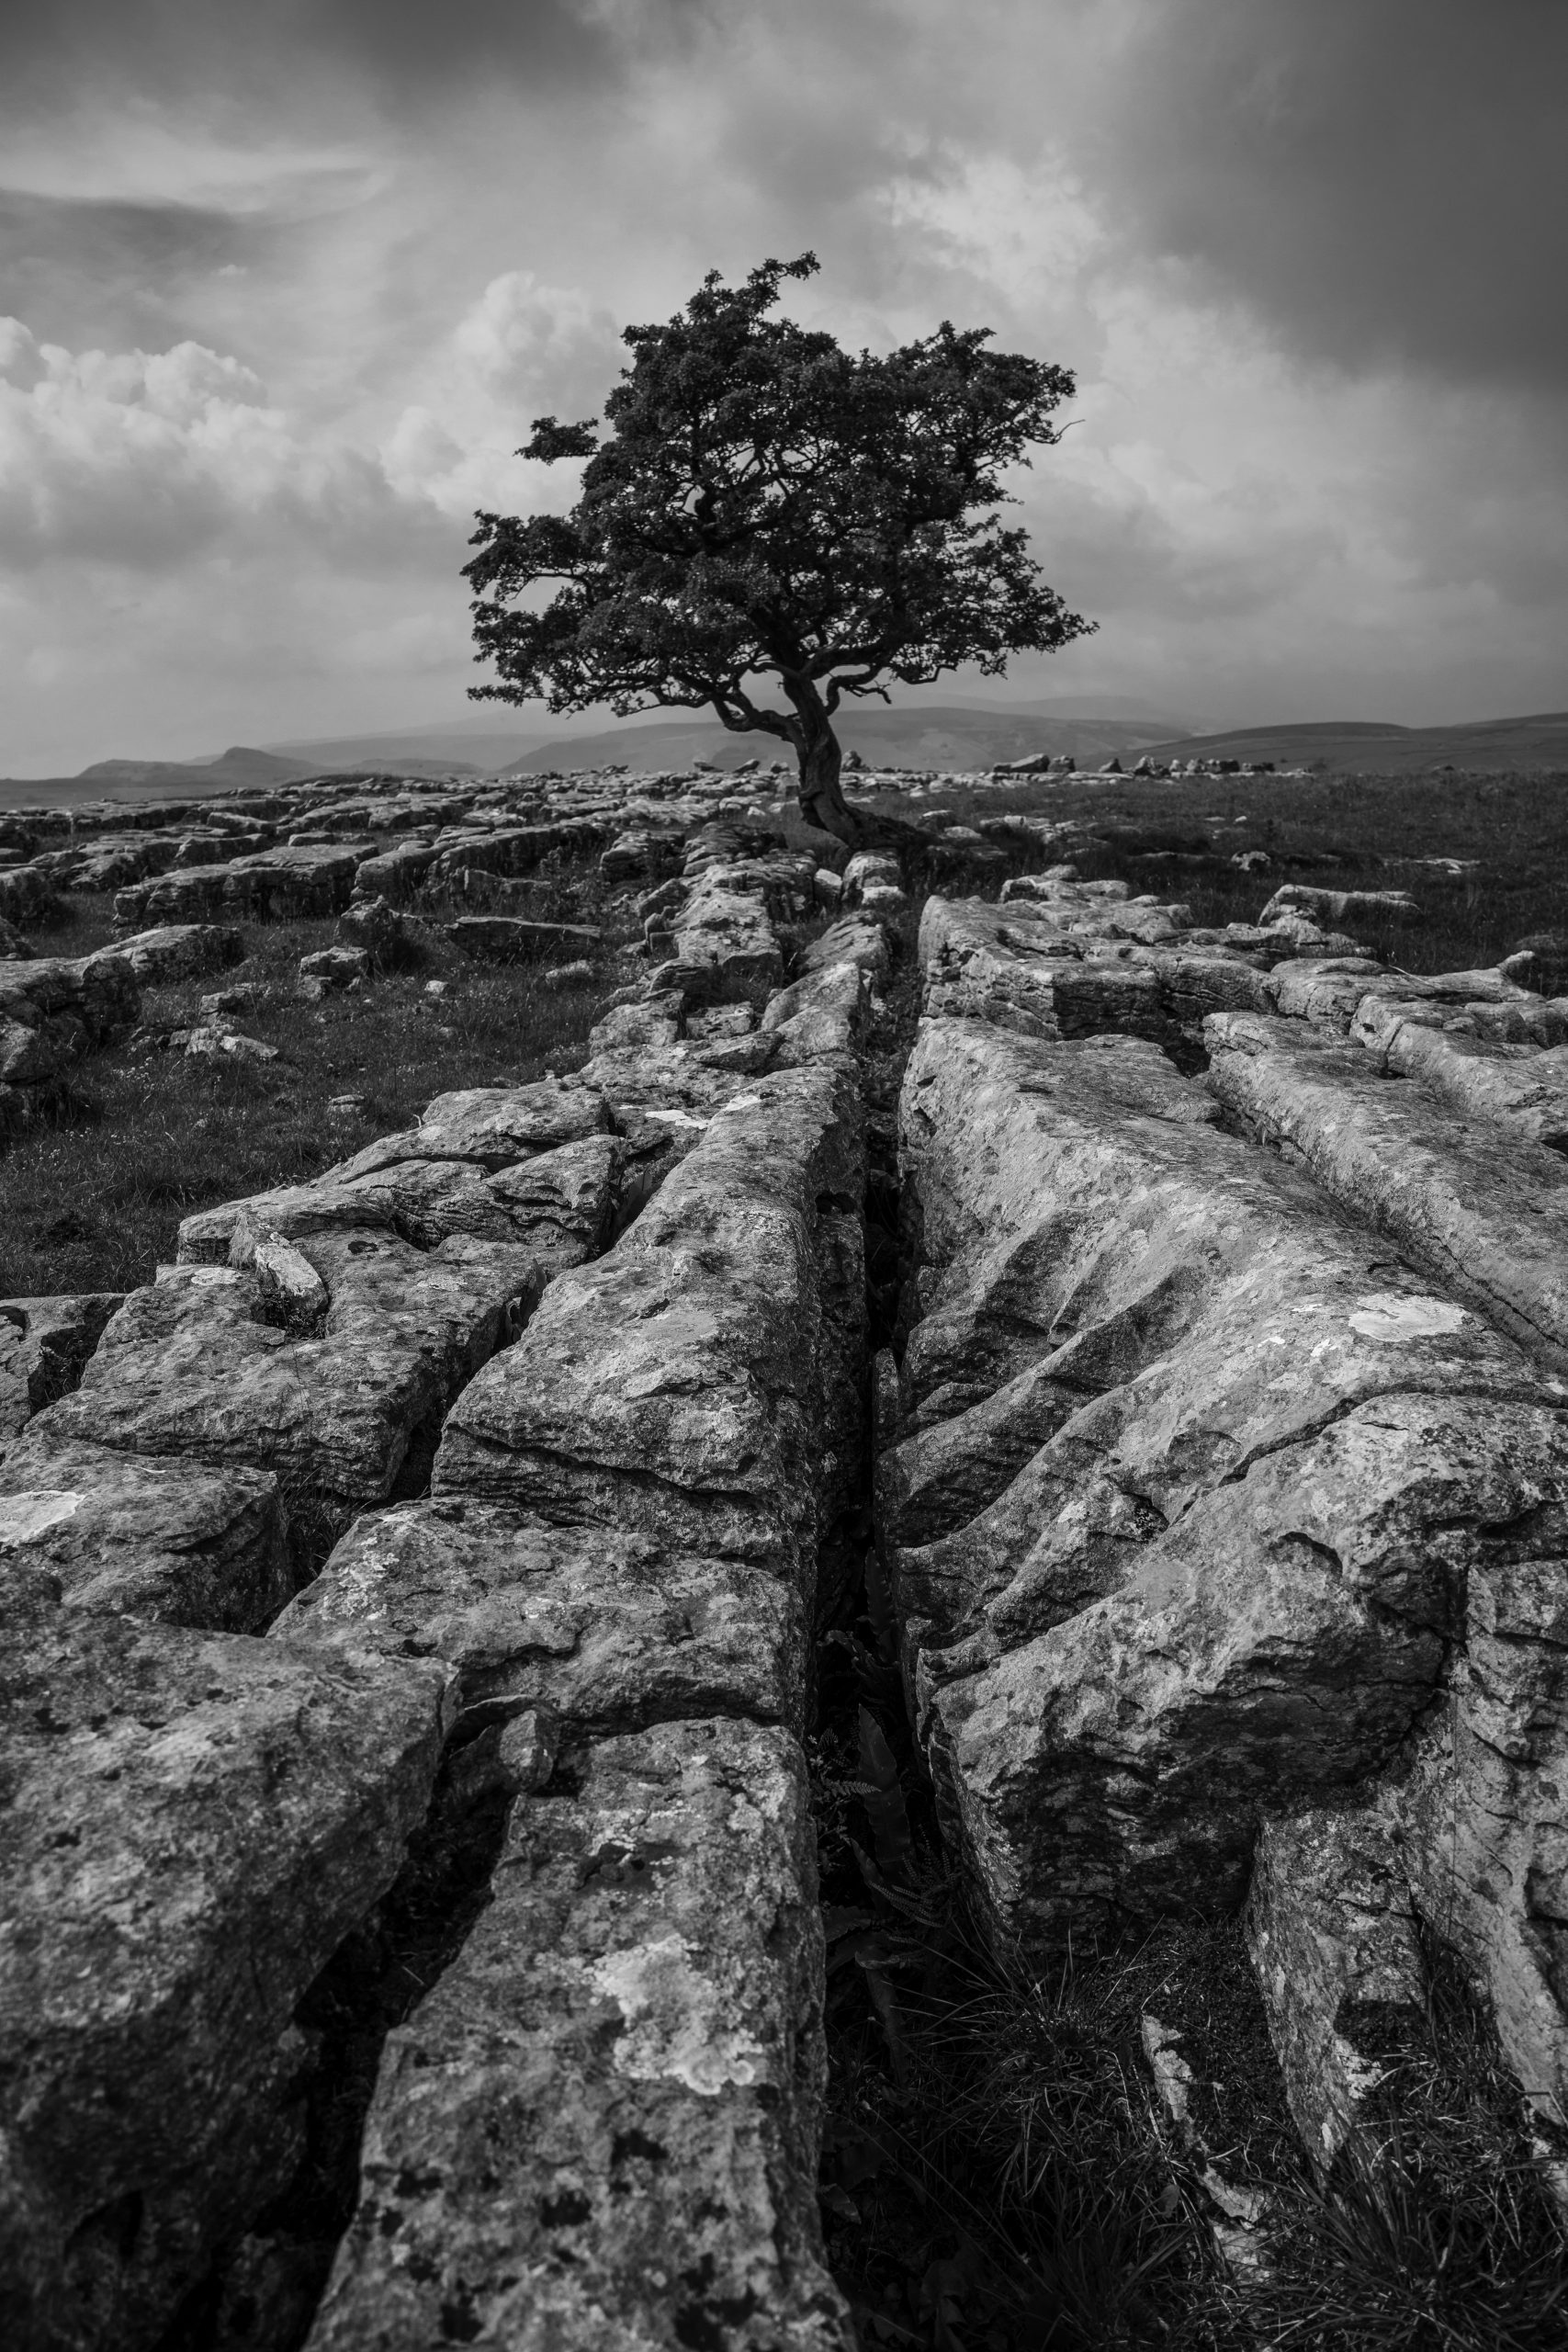 A limestone pavement in the Yorkshire Dales, with a lone Hawthorn tree.